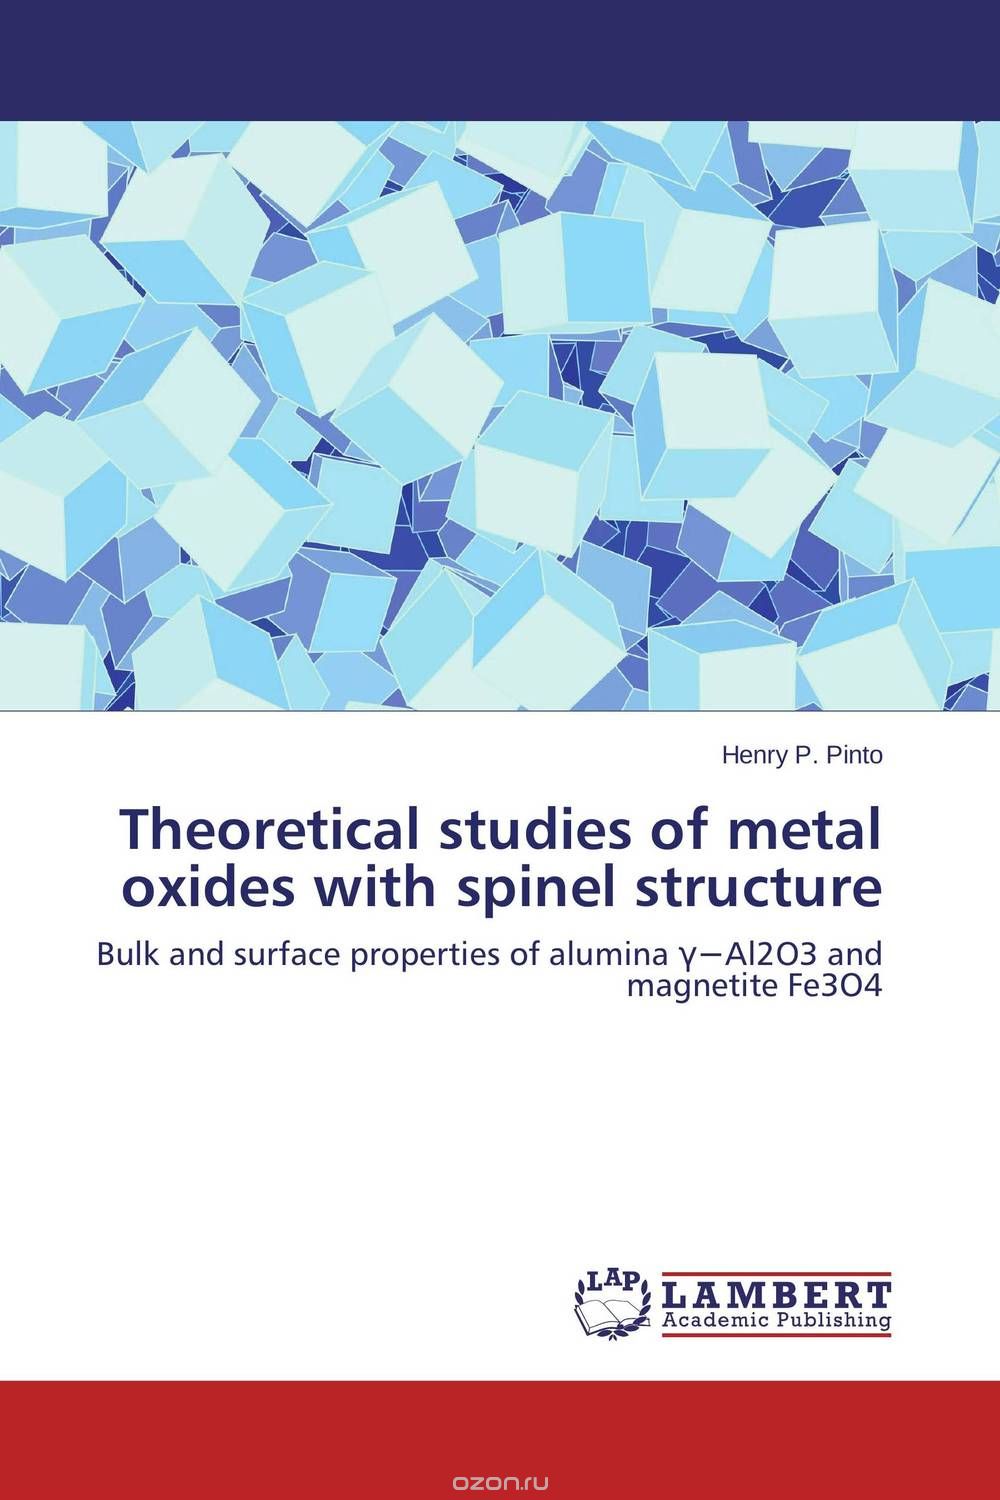 Скачать книгу "Theoretical studies of metal oxides with spinel structure"